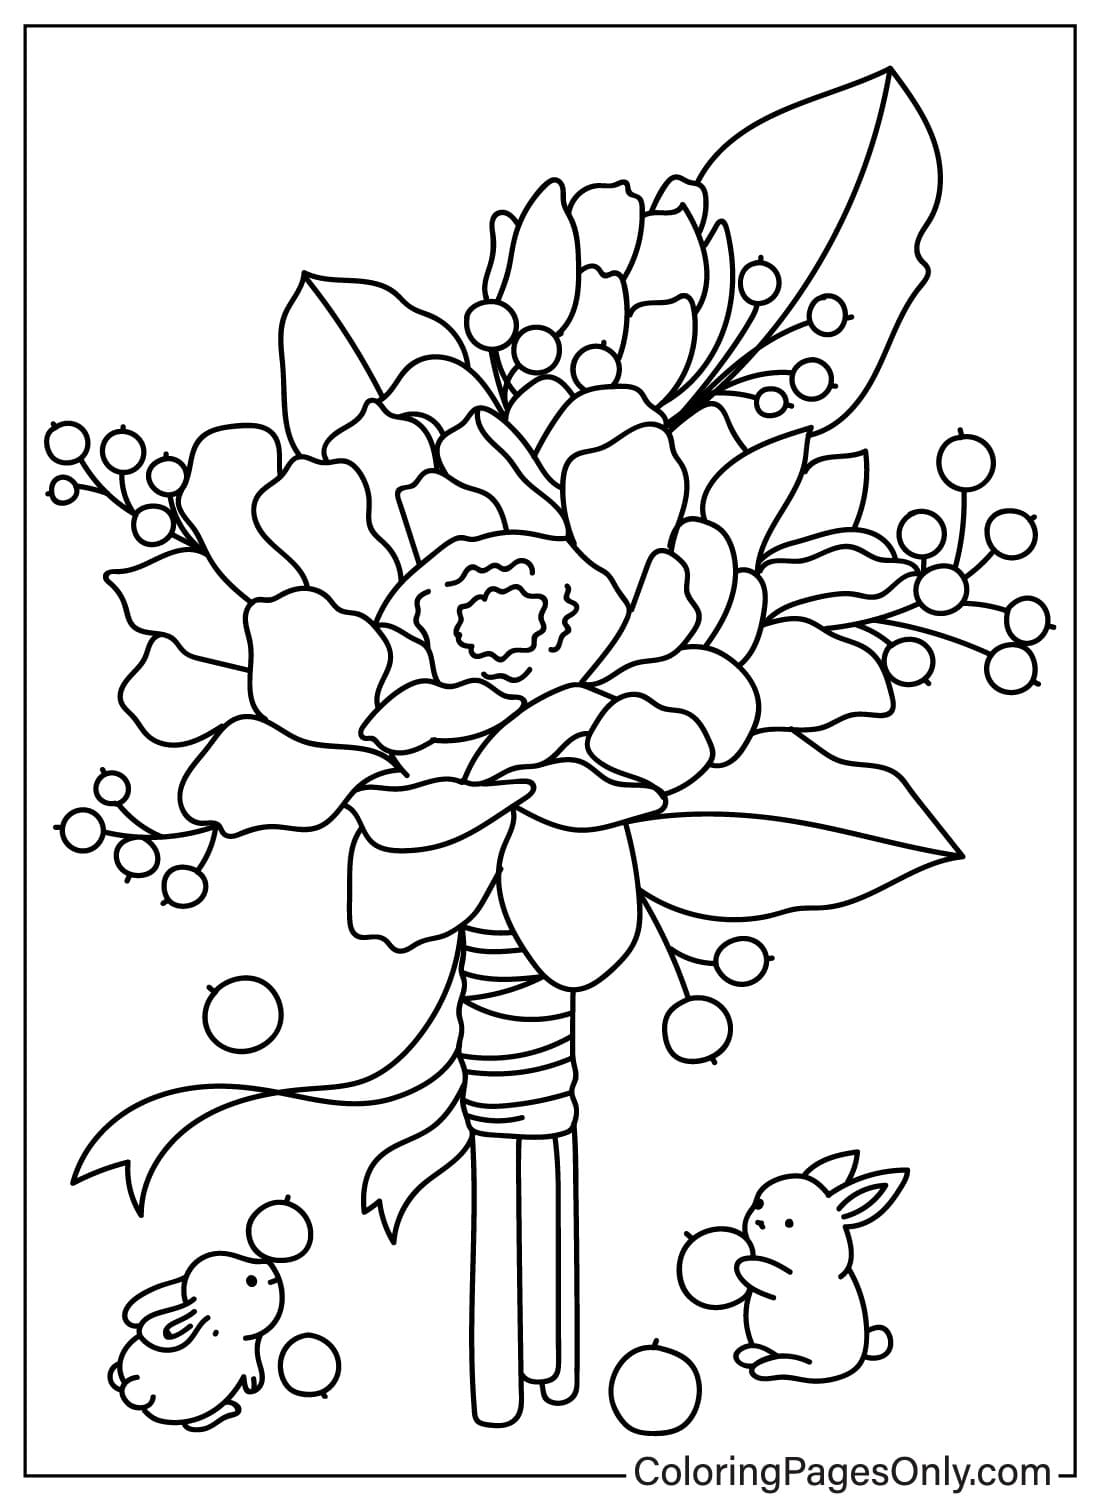 Flower Bouquet Coloring Page Free from Flower Bouquet